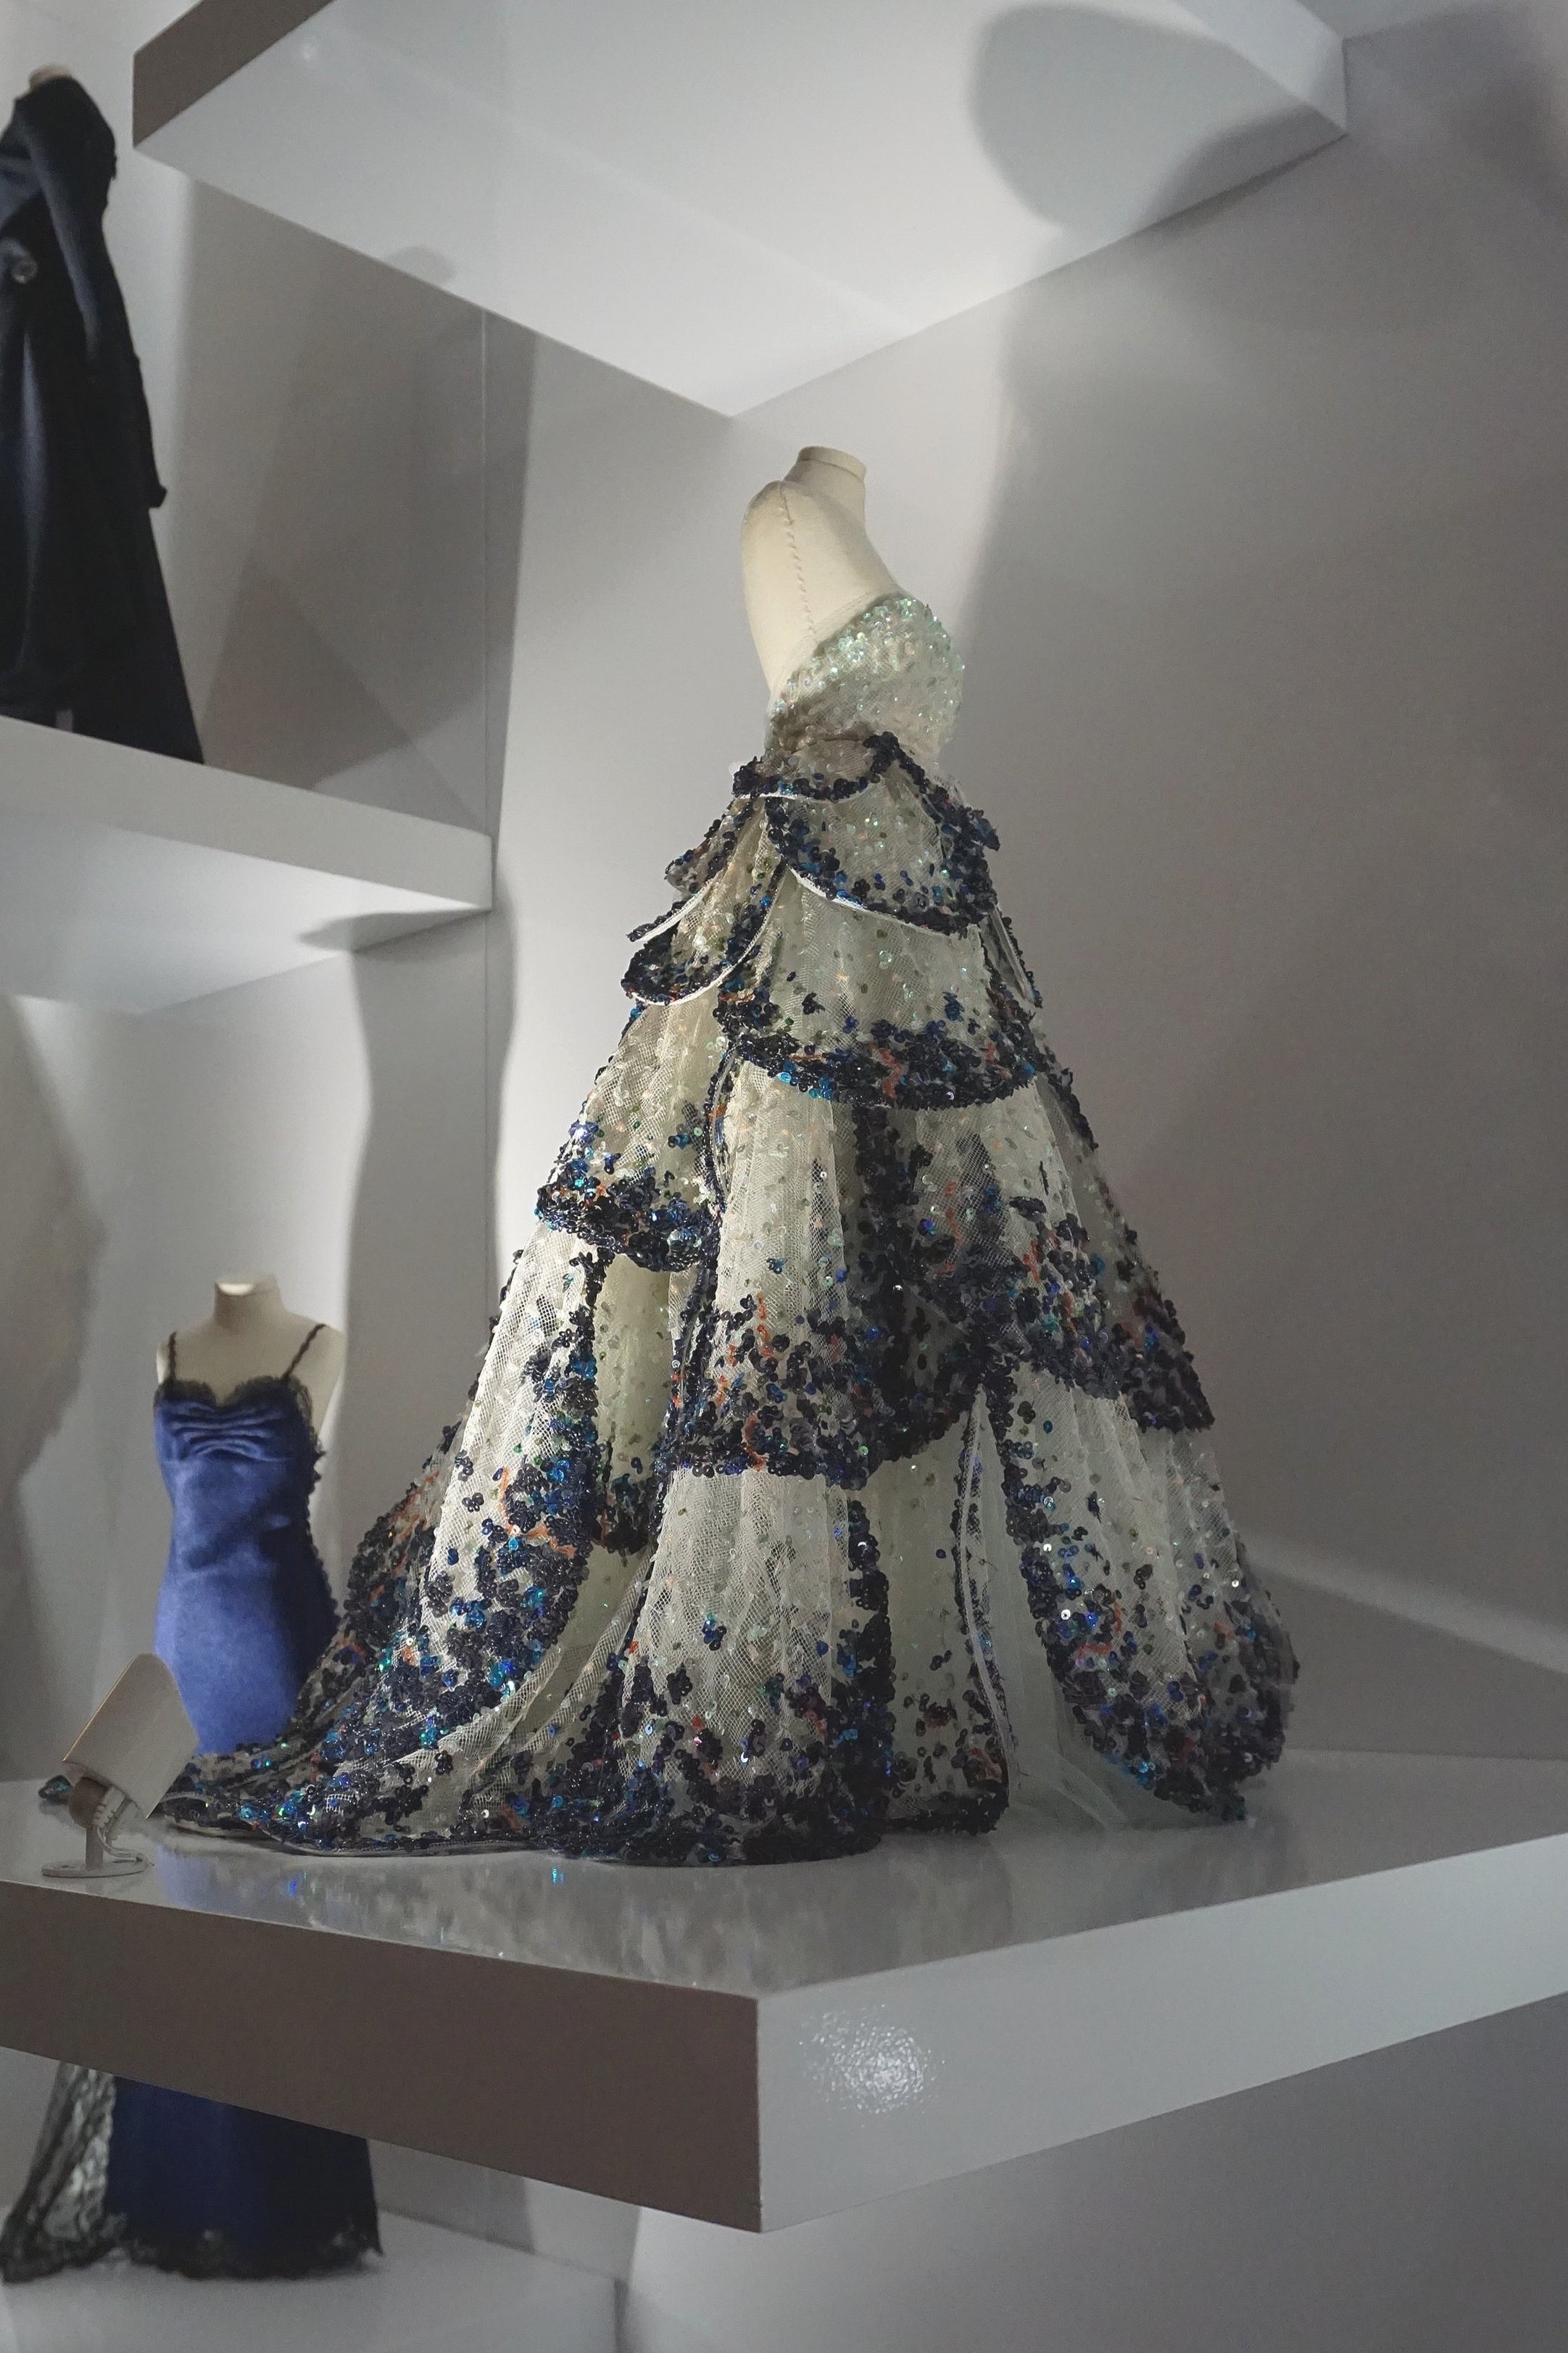 Miniature of the Junon dress by Christian Dior